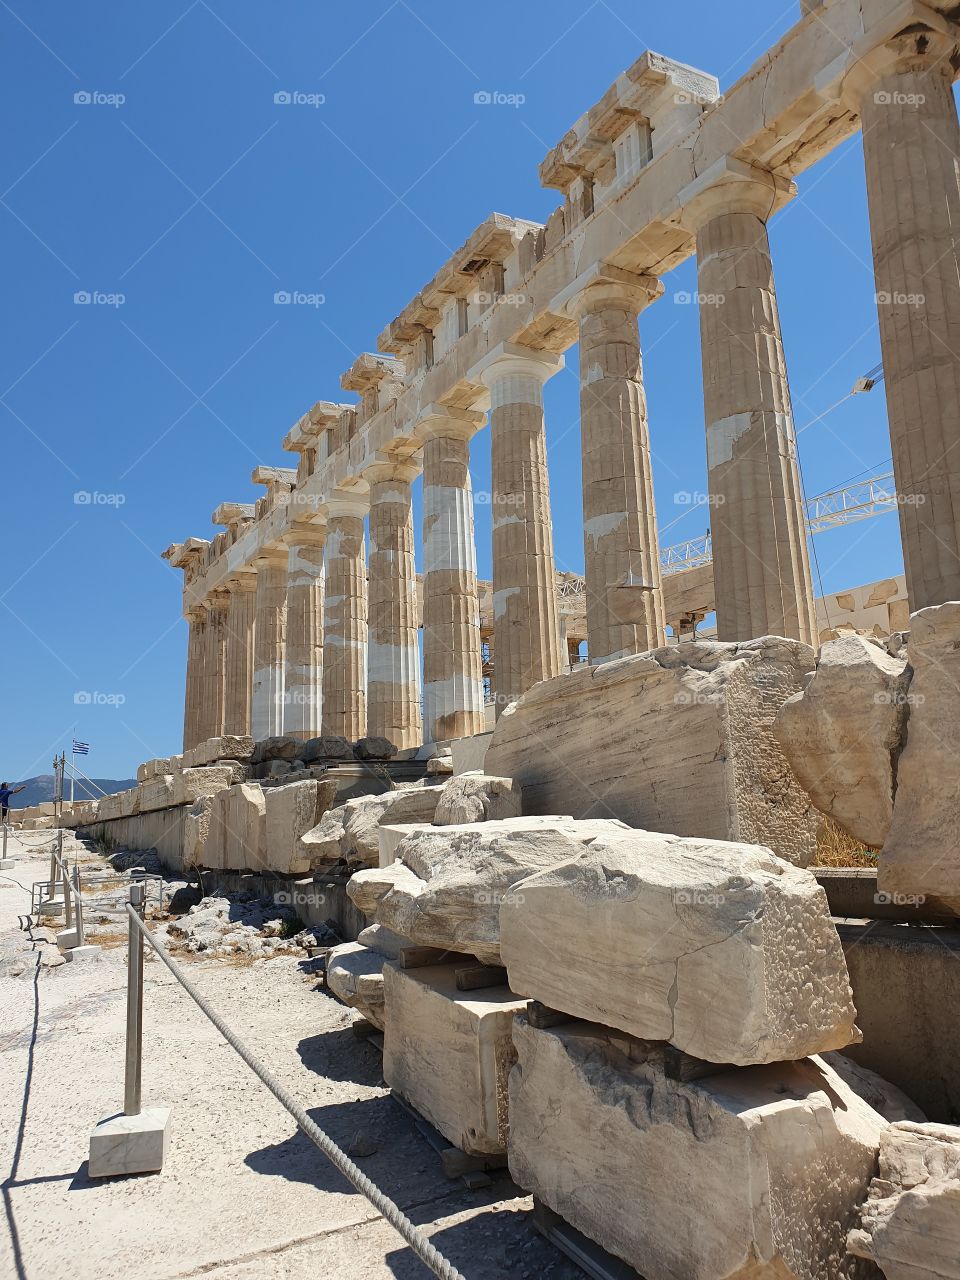 Parthenon, temple that dominates the hill of the Acropolis at Athens, Greece.